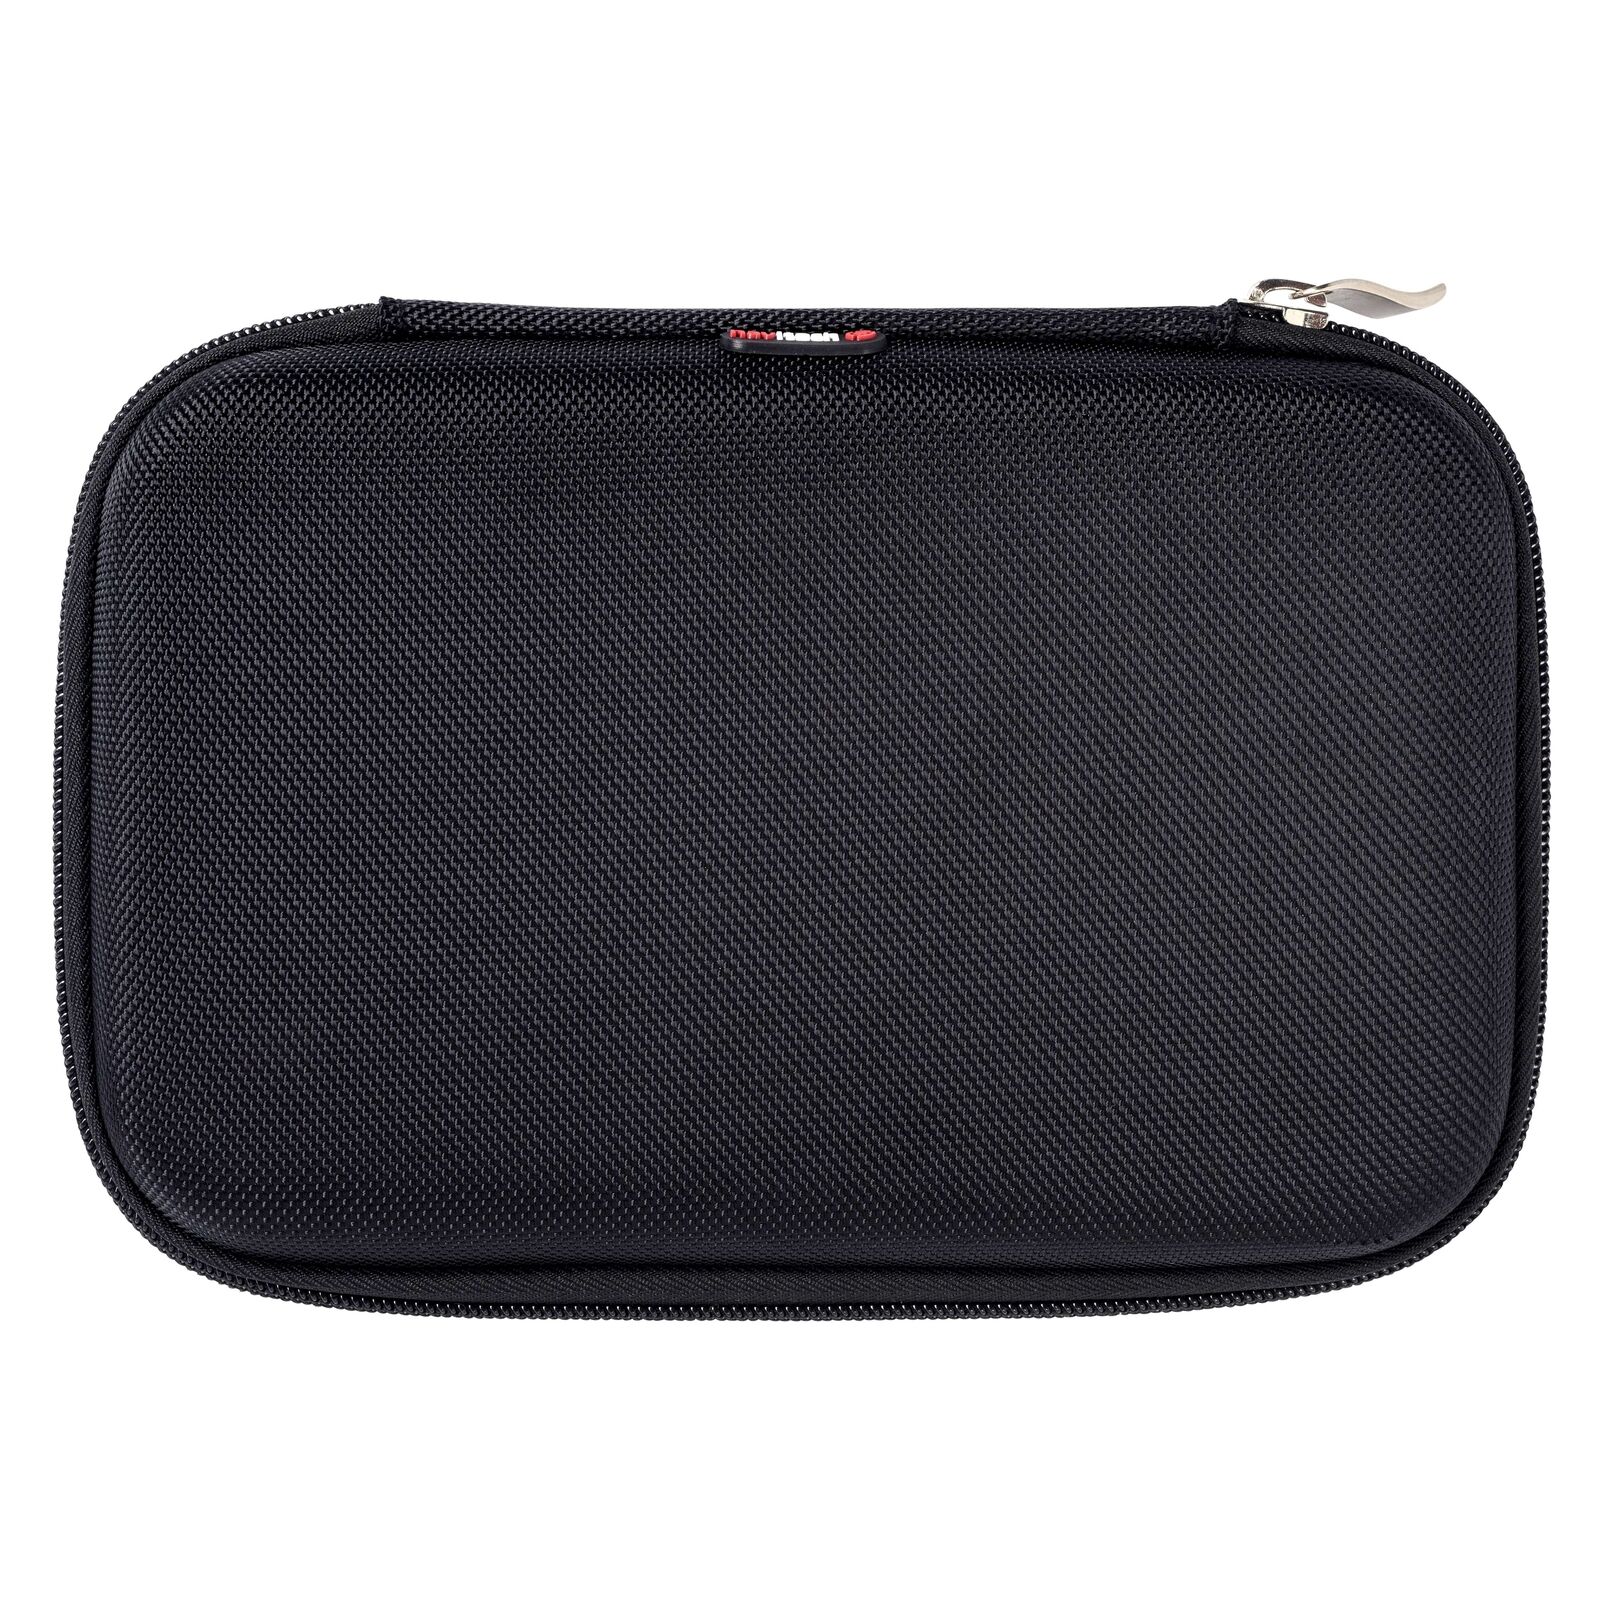 Navitech Black Hard Case for The Wacom Intuos Graphics Tablet 8 x 6